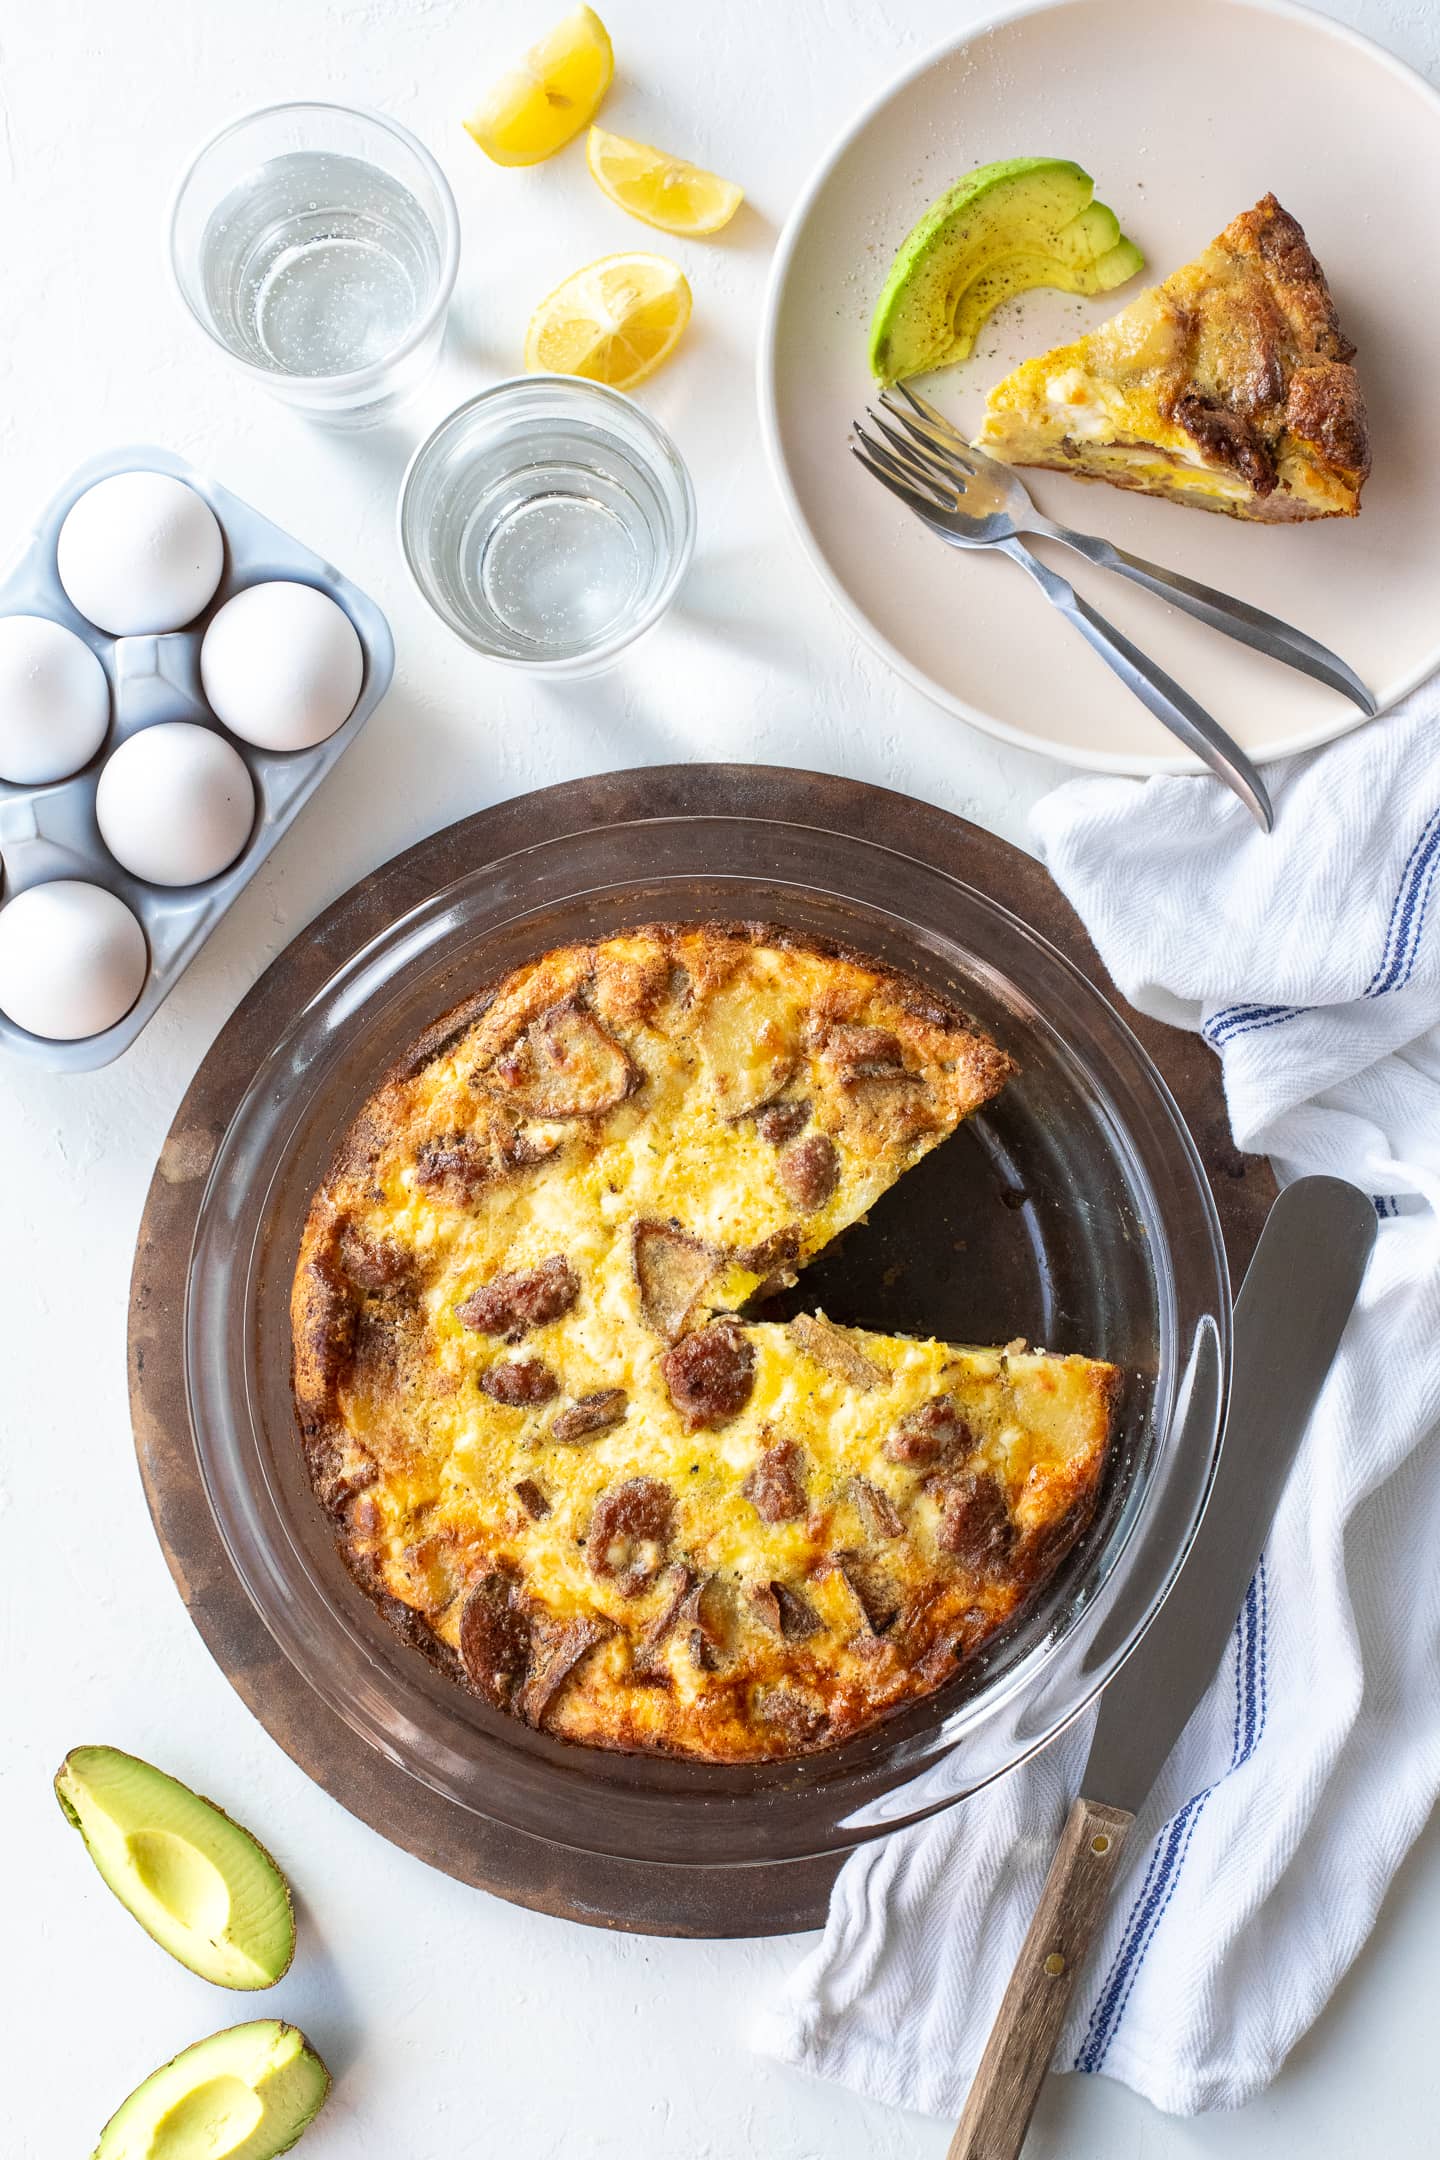 Overhead view of crustless quiche in a pie dish with a slice removed, surrounded by eggs, avocado, and a slice ready to serve on a plate.